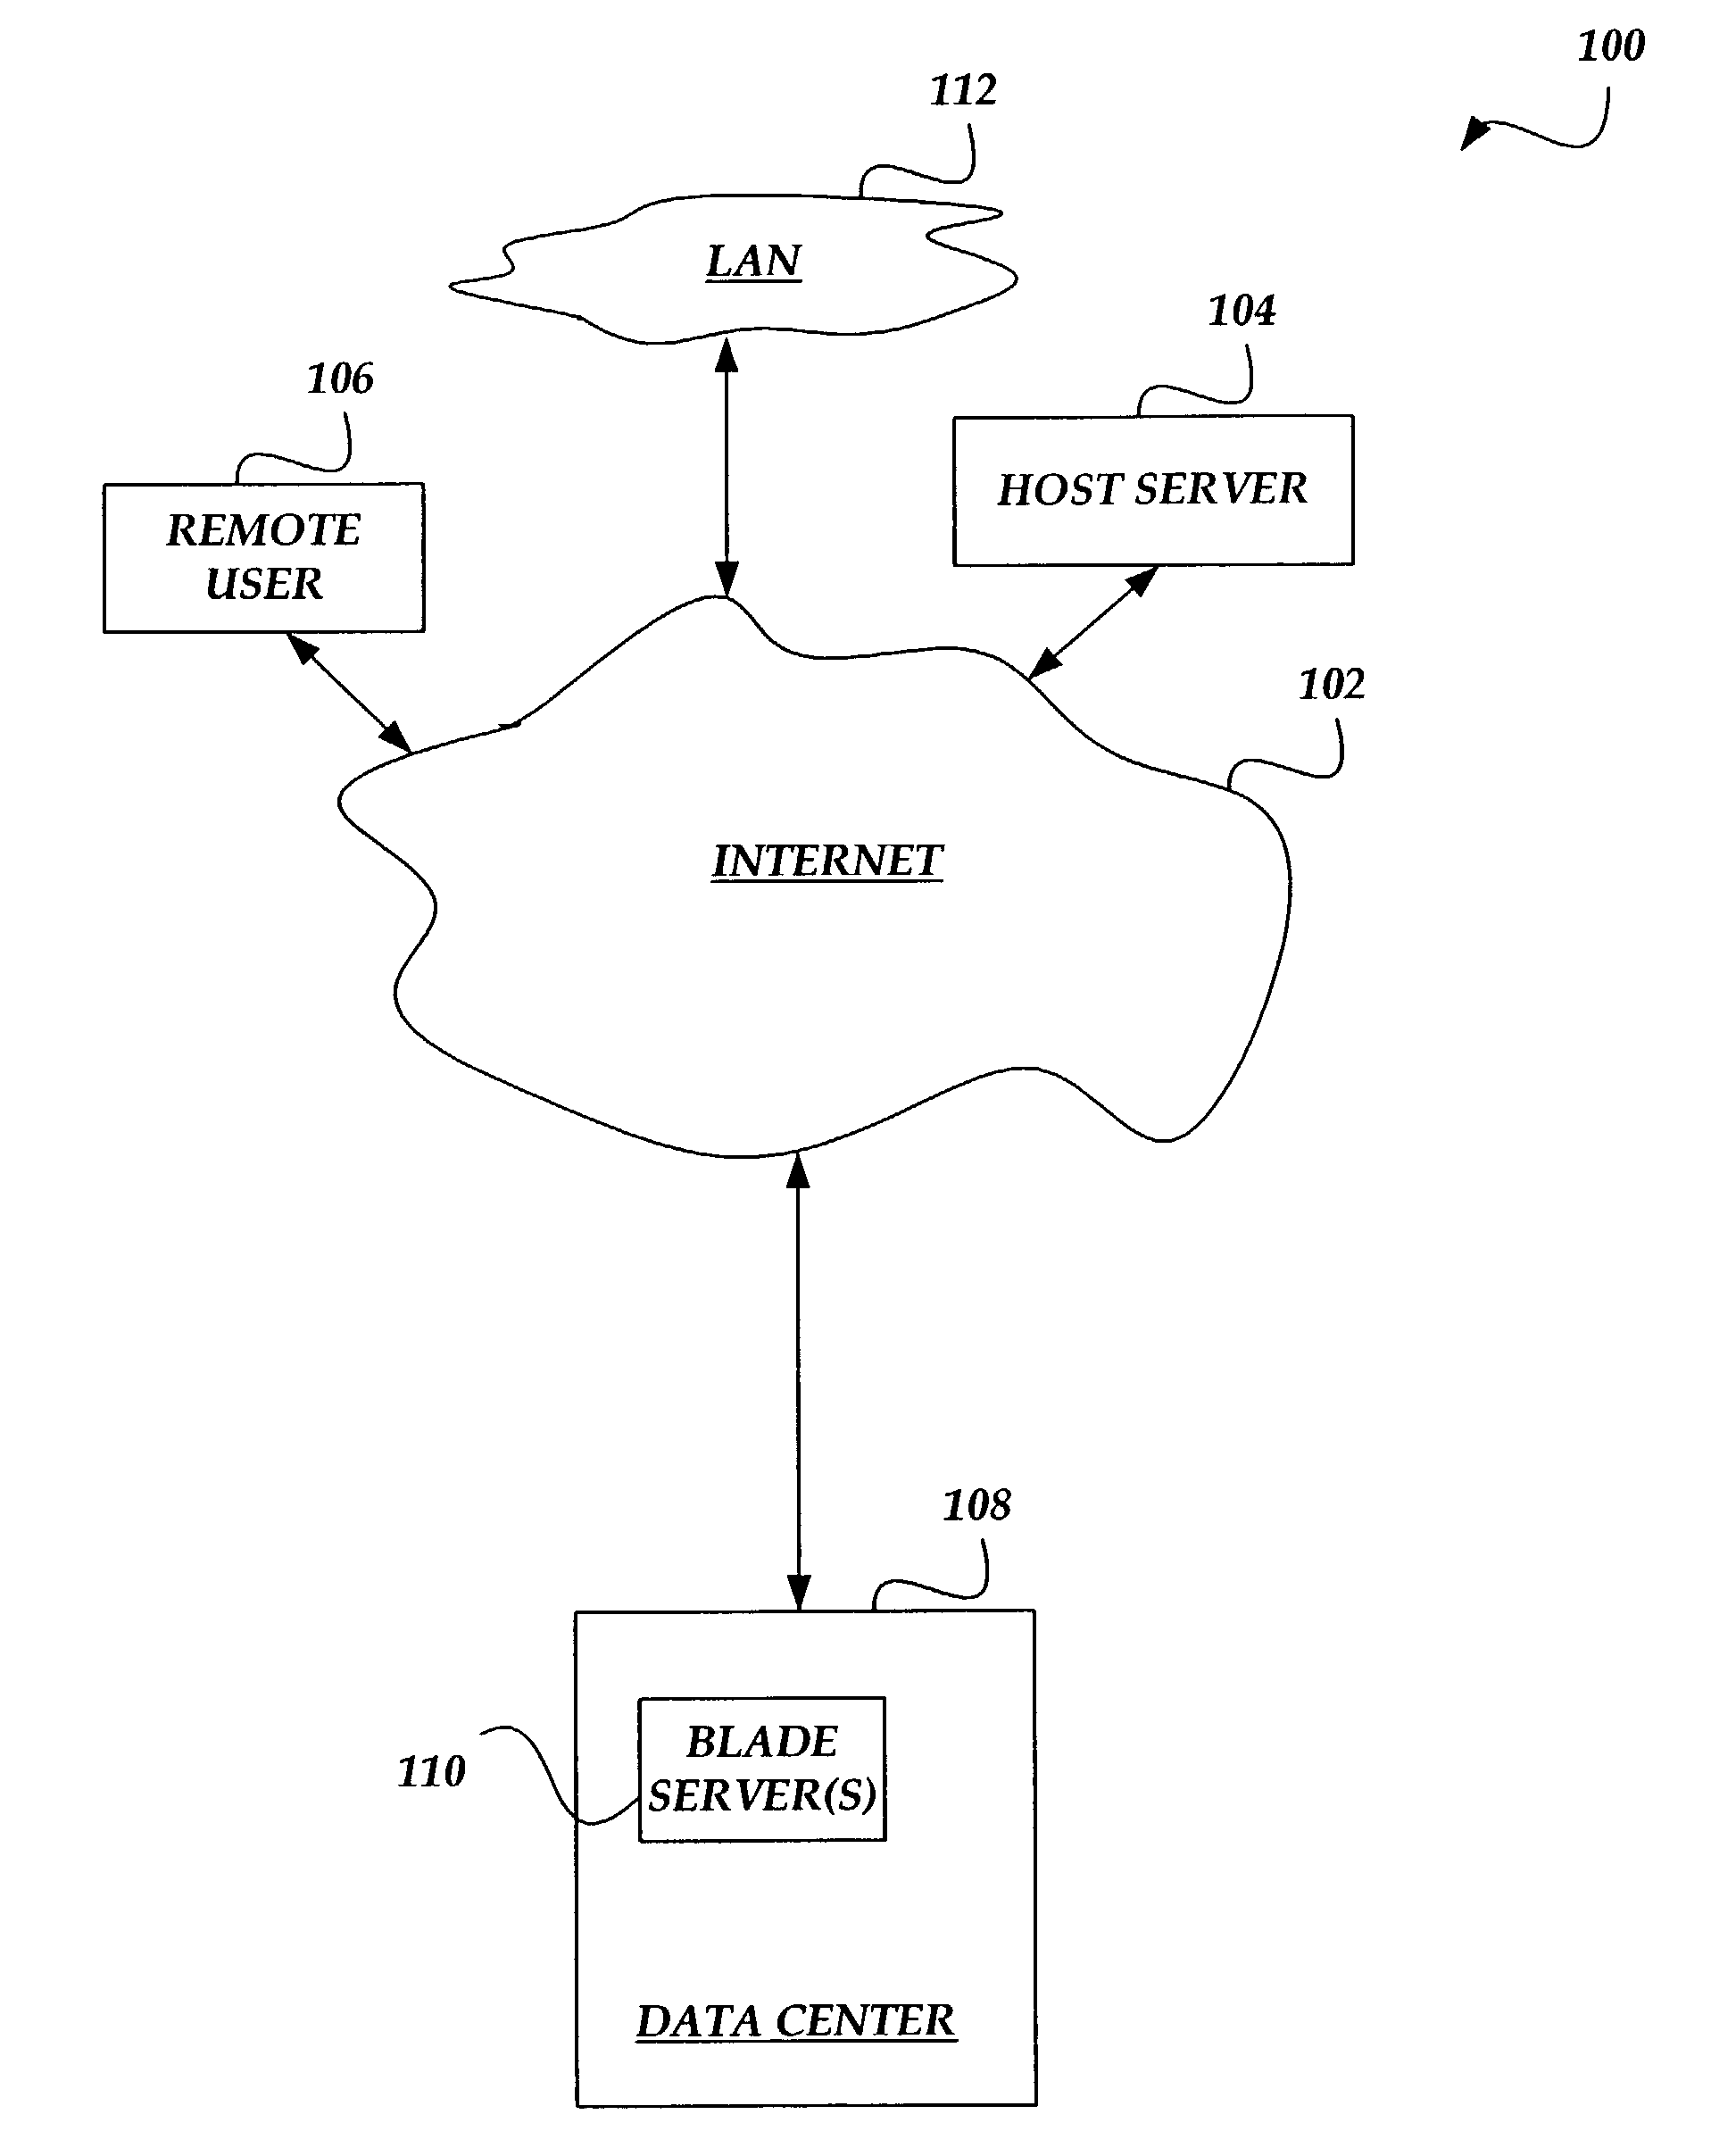 Method and system for hard disk emulation and cryptographic acceleration on a blade server